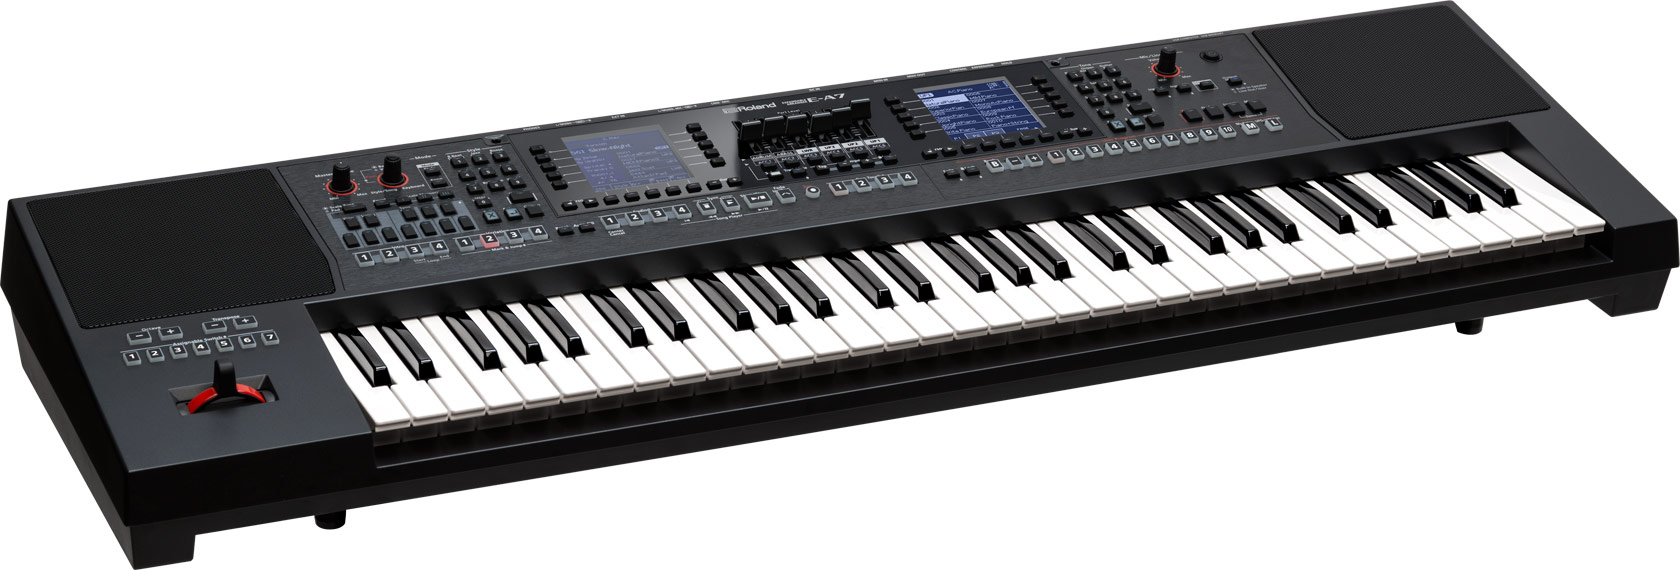 Roland E-a7 Expo - Entertainer Keyboard - Variation 1